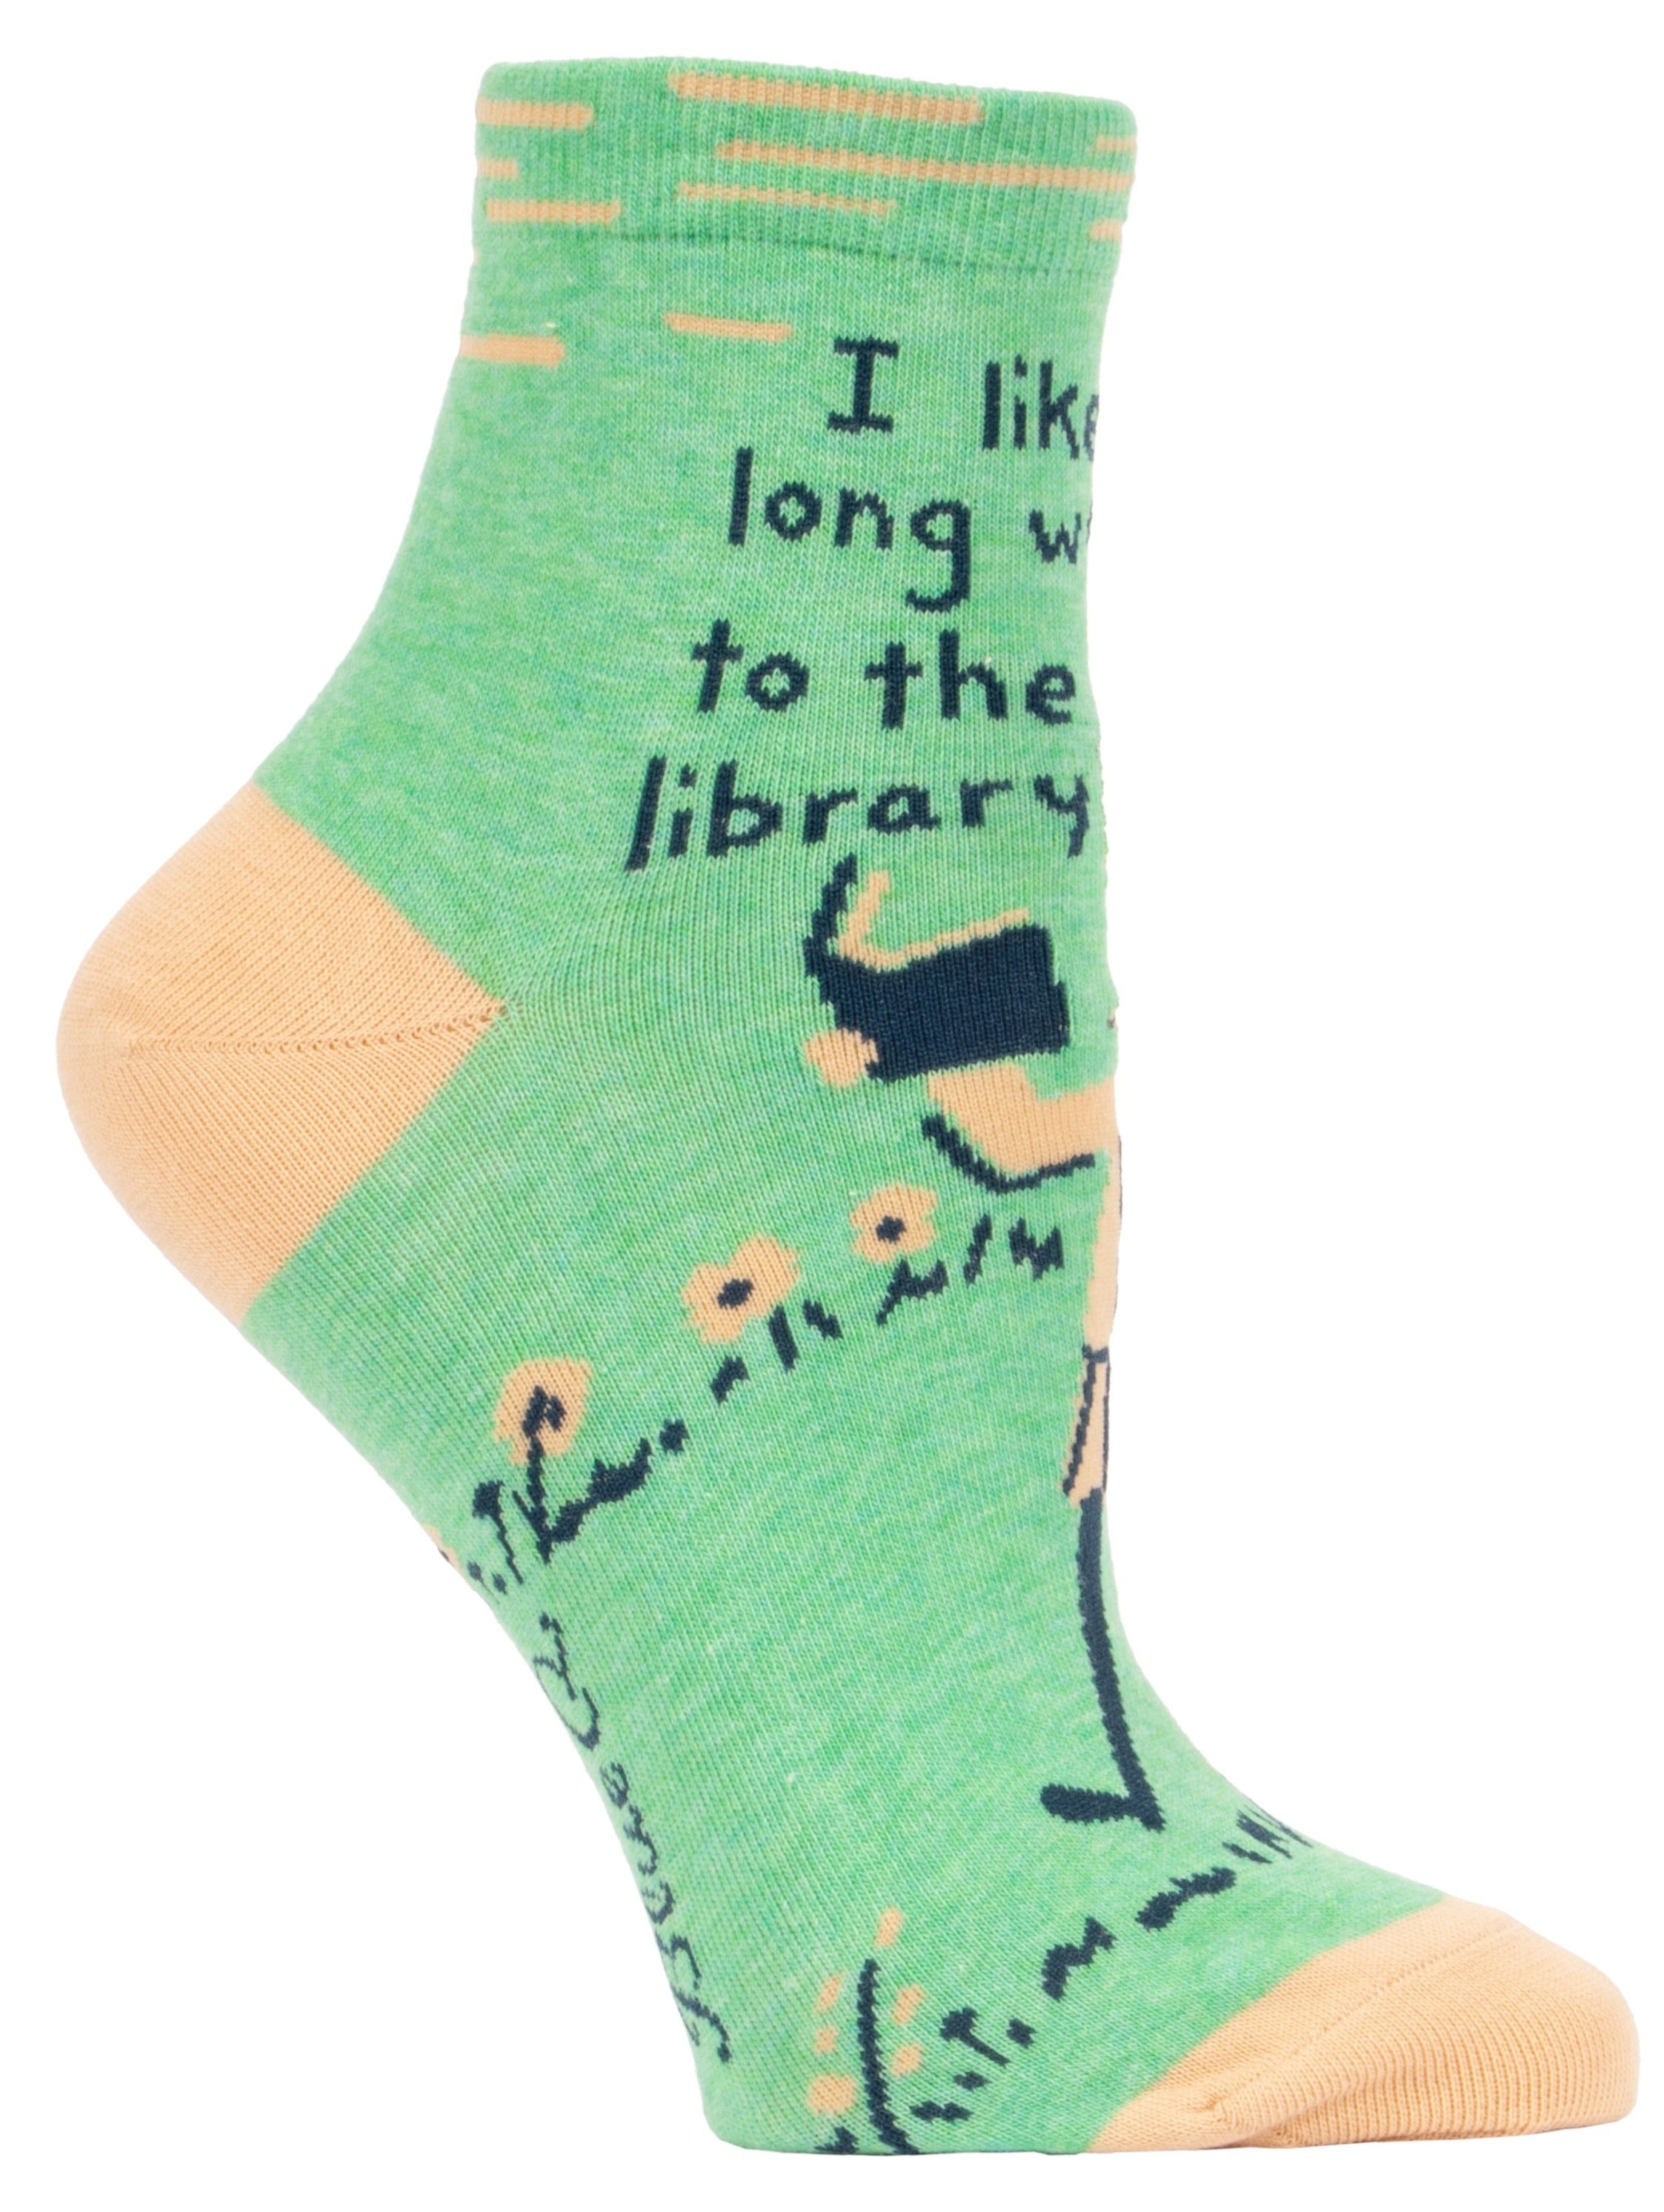 Blue Q - Ankle Socks - I like long walks... to the library